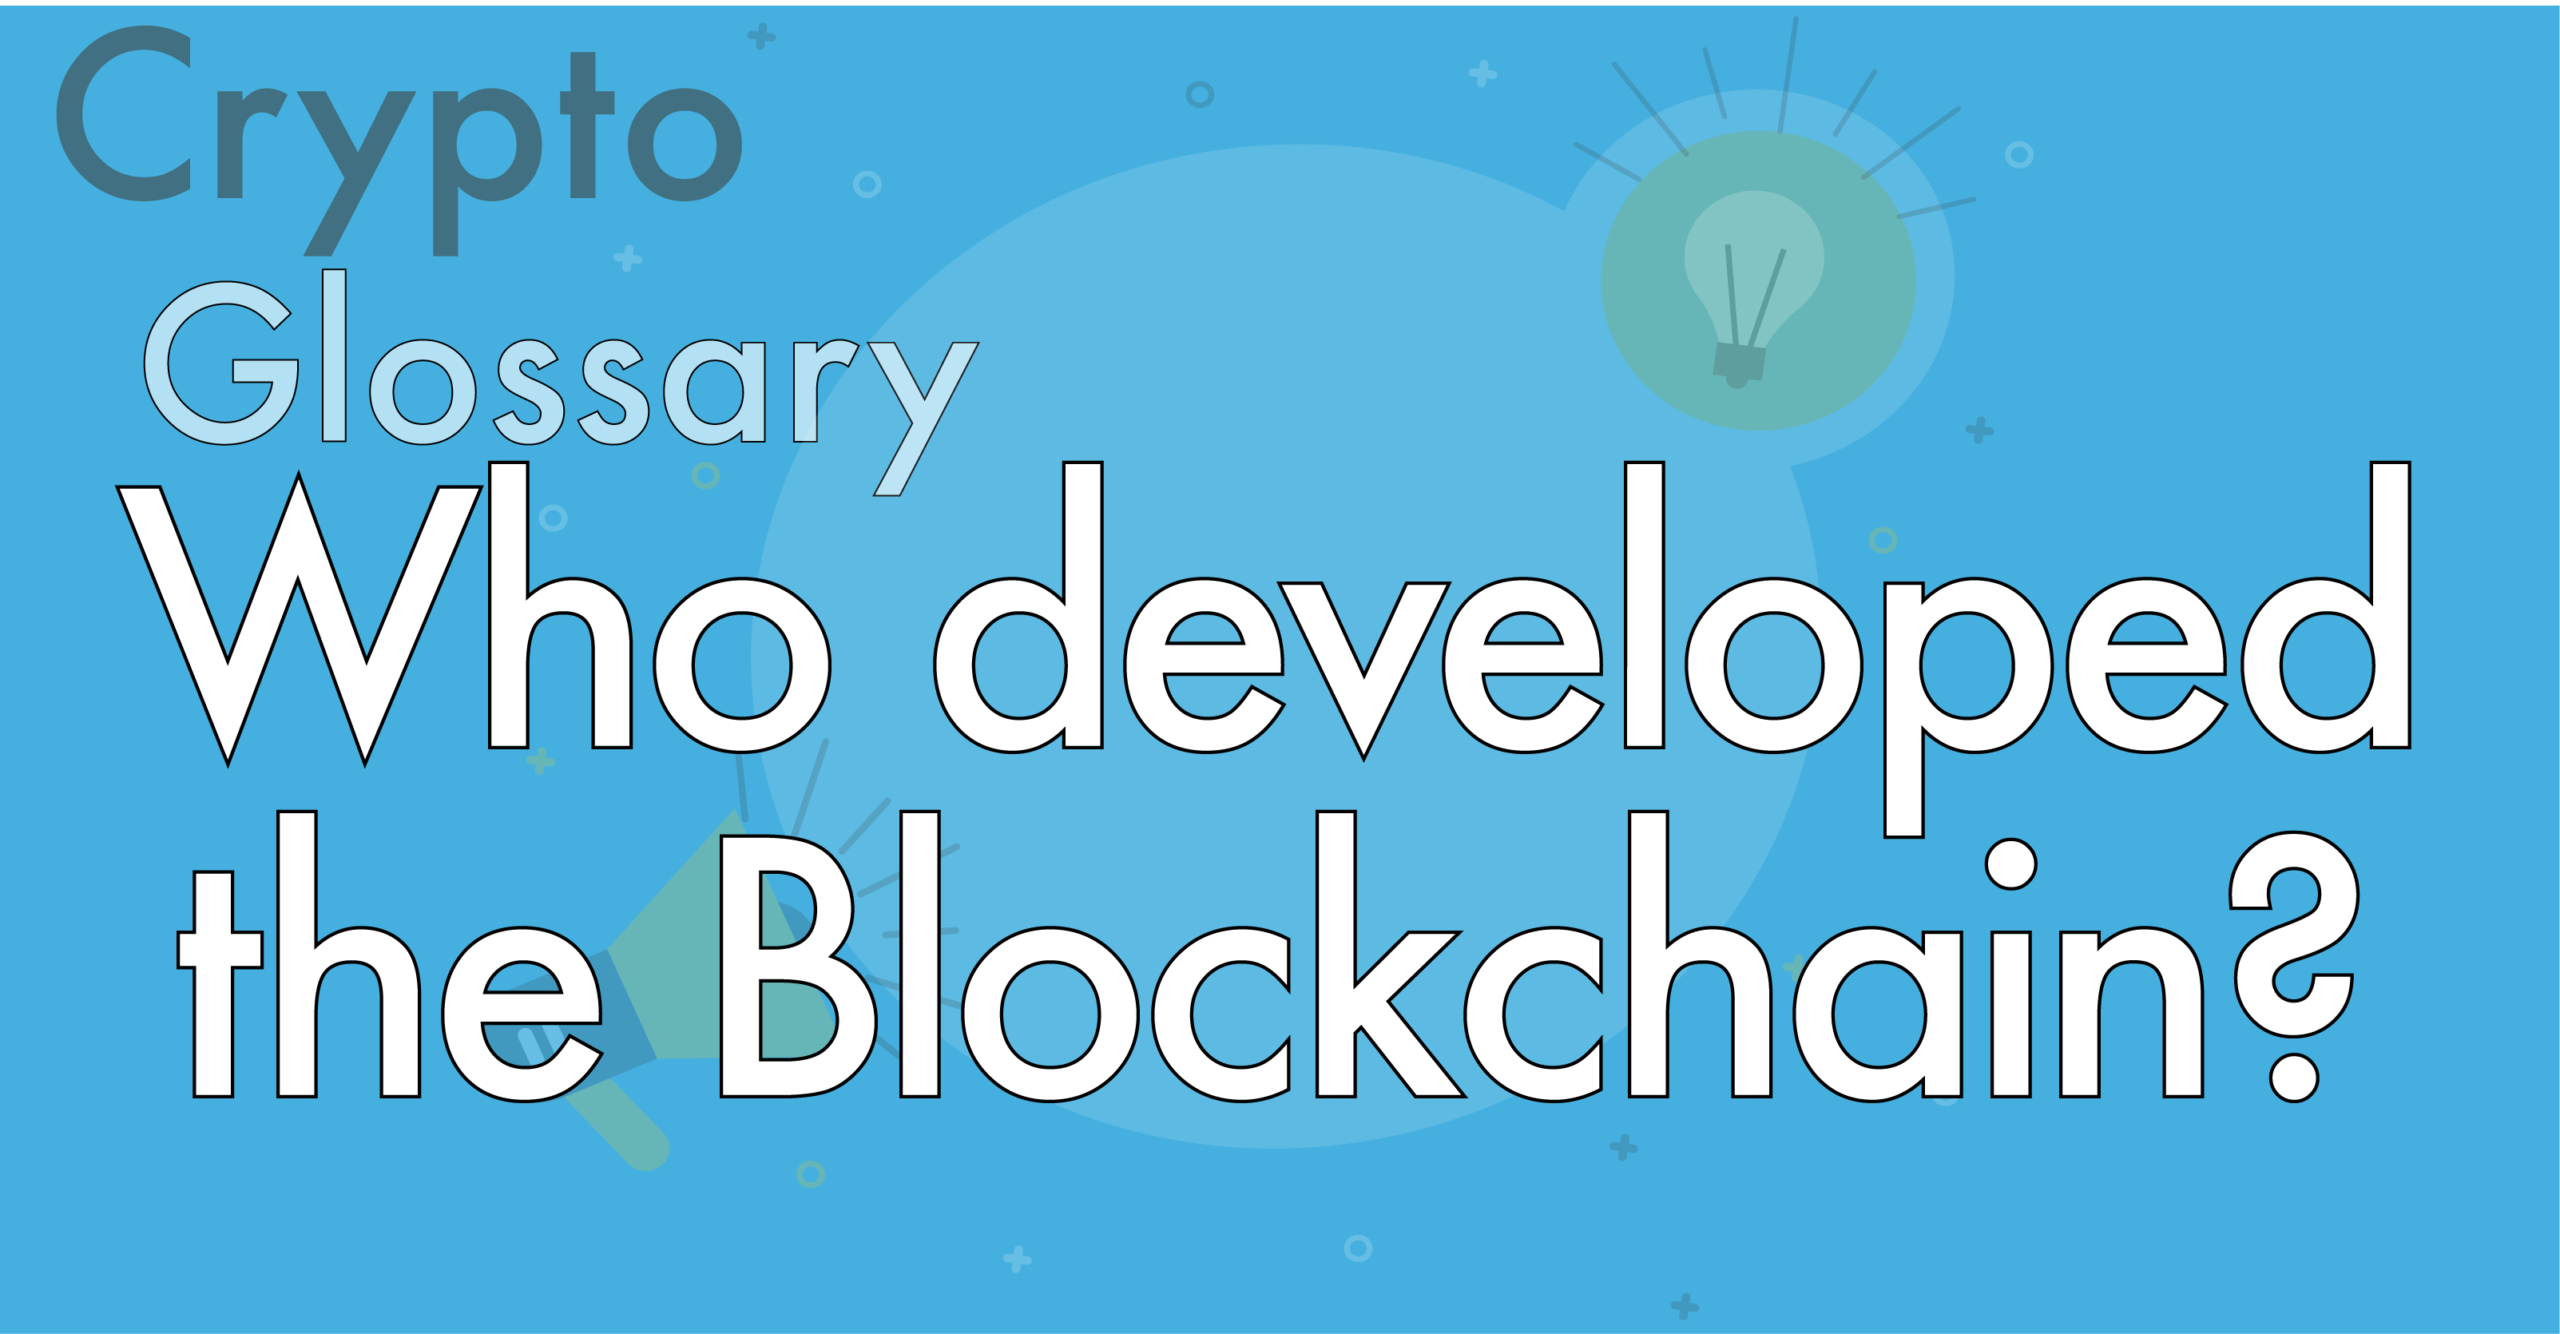 Who Developed Blockchain and Where is He Now?